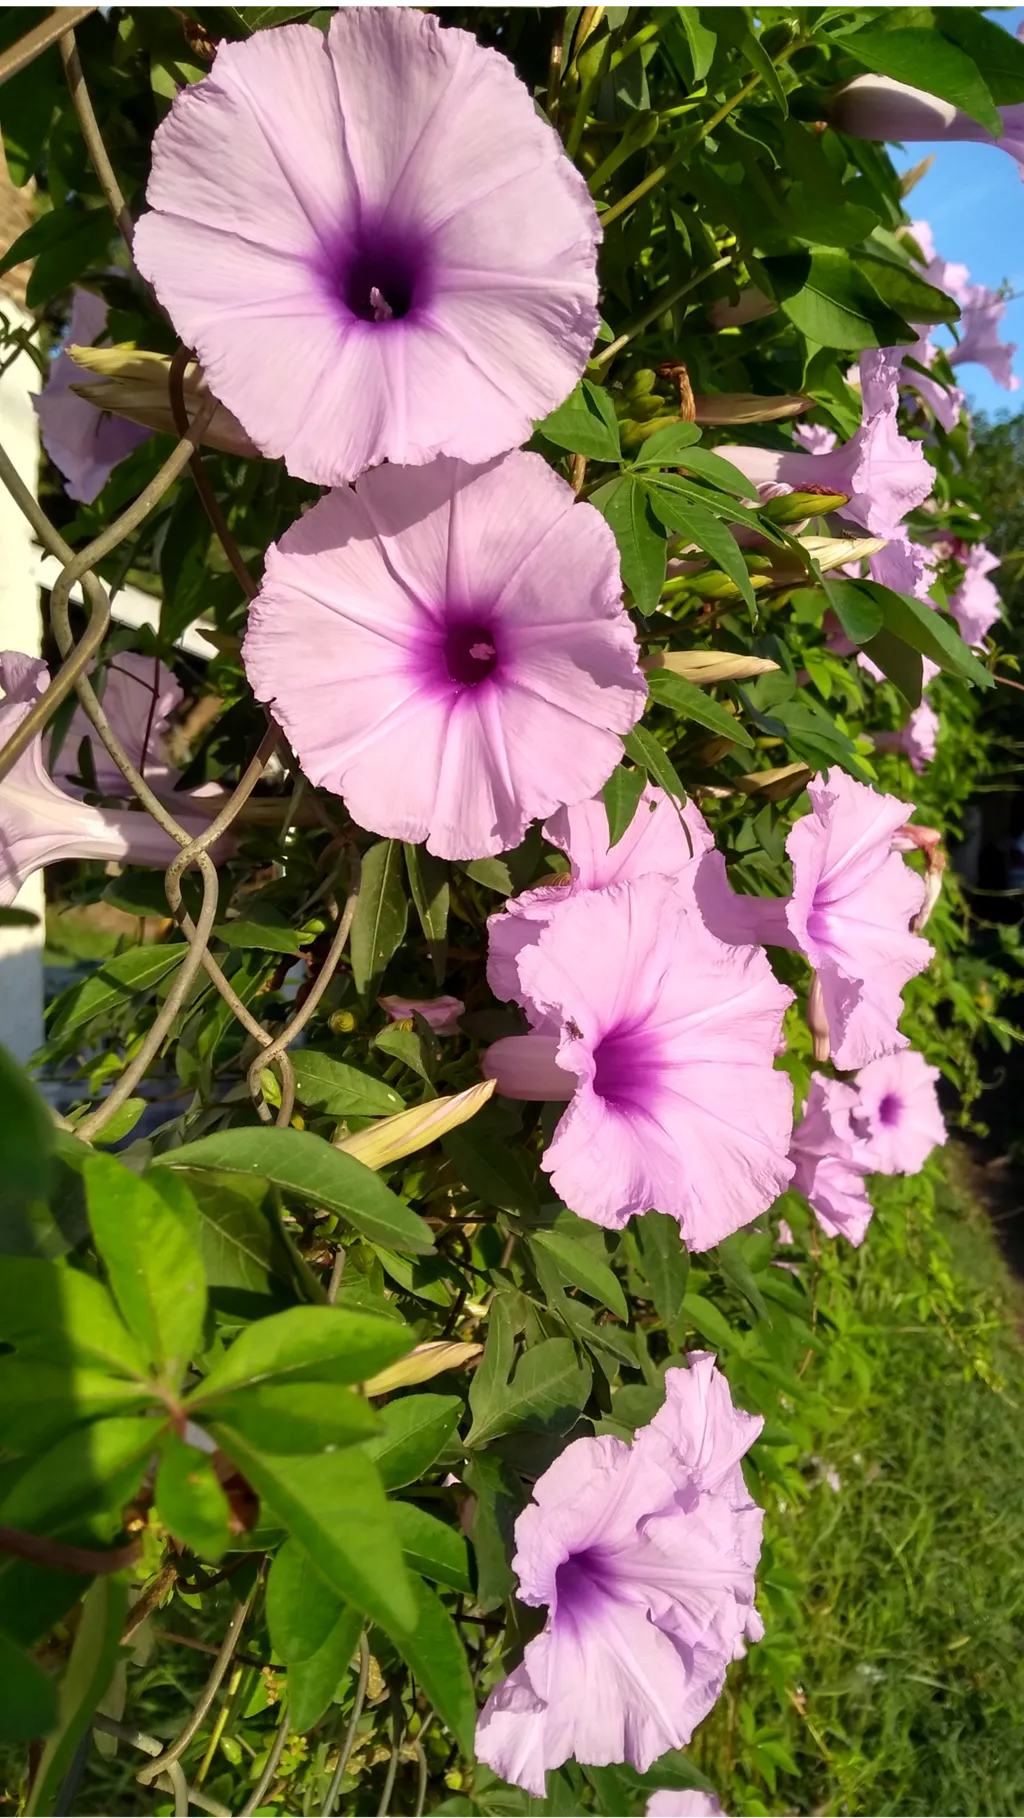 Ipomoea Cairica in the Morning